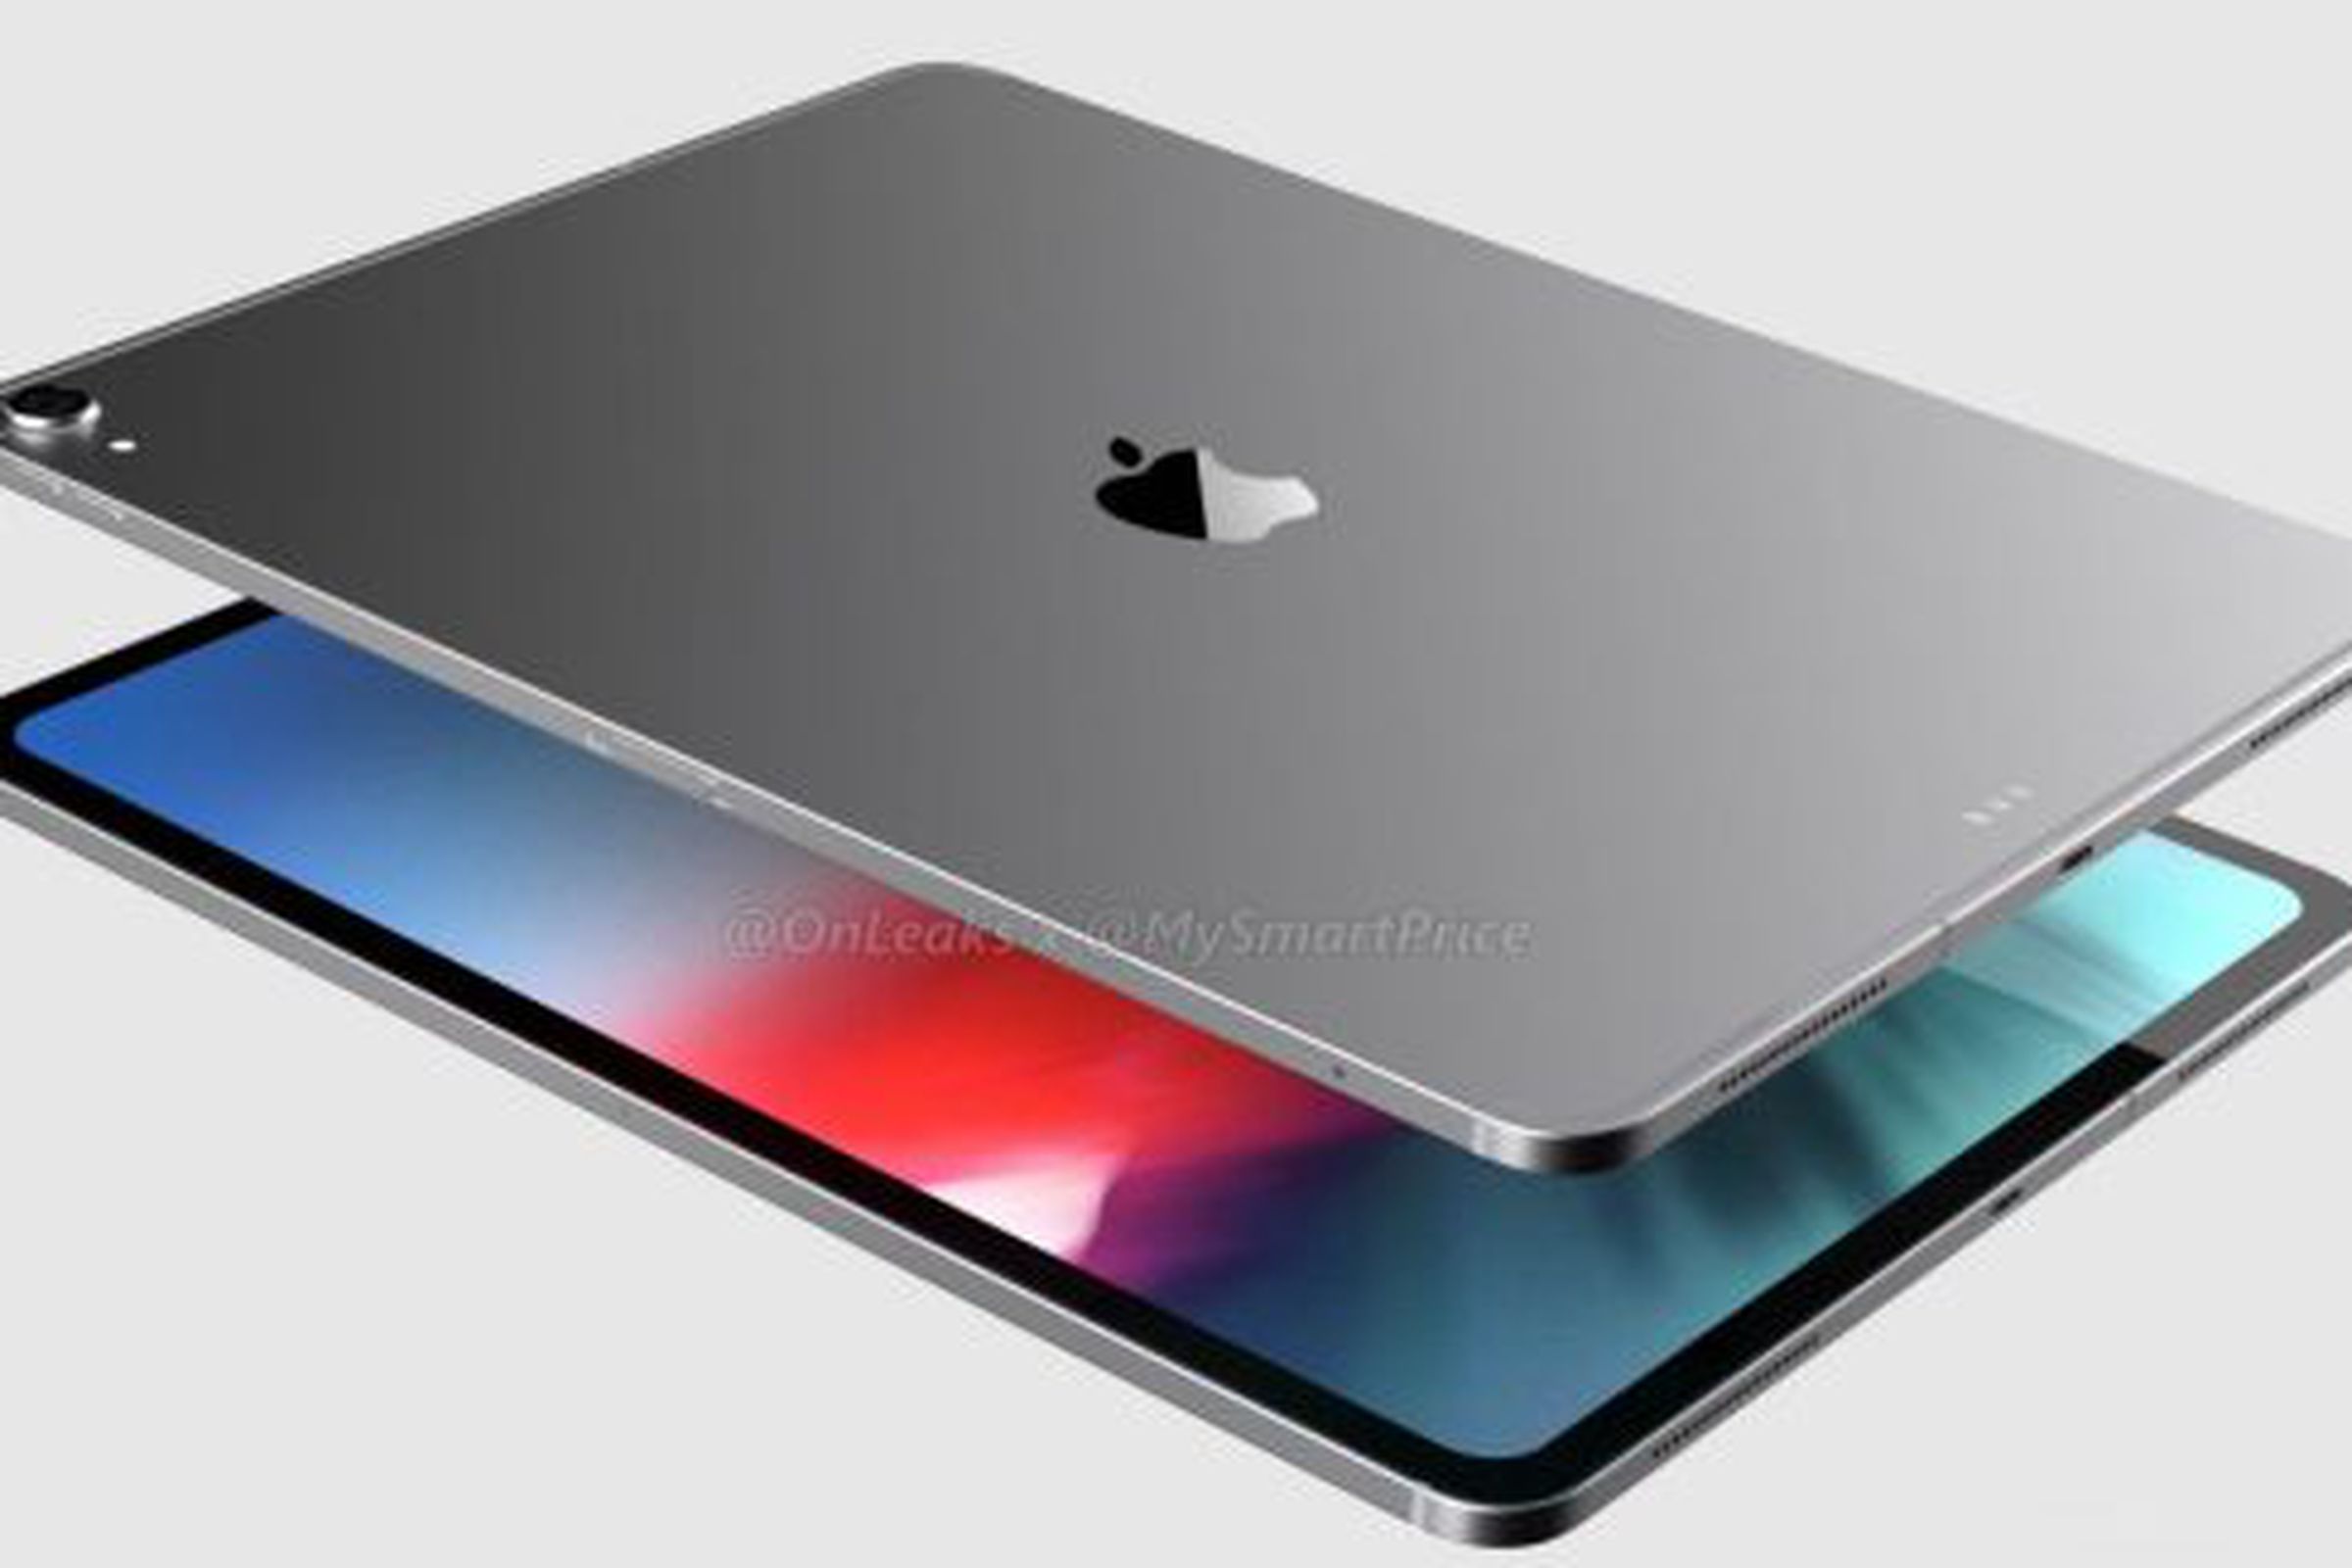 Renders of the upcoming device suggest an iPad with a radically different design.